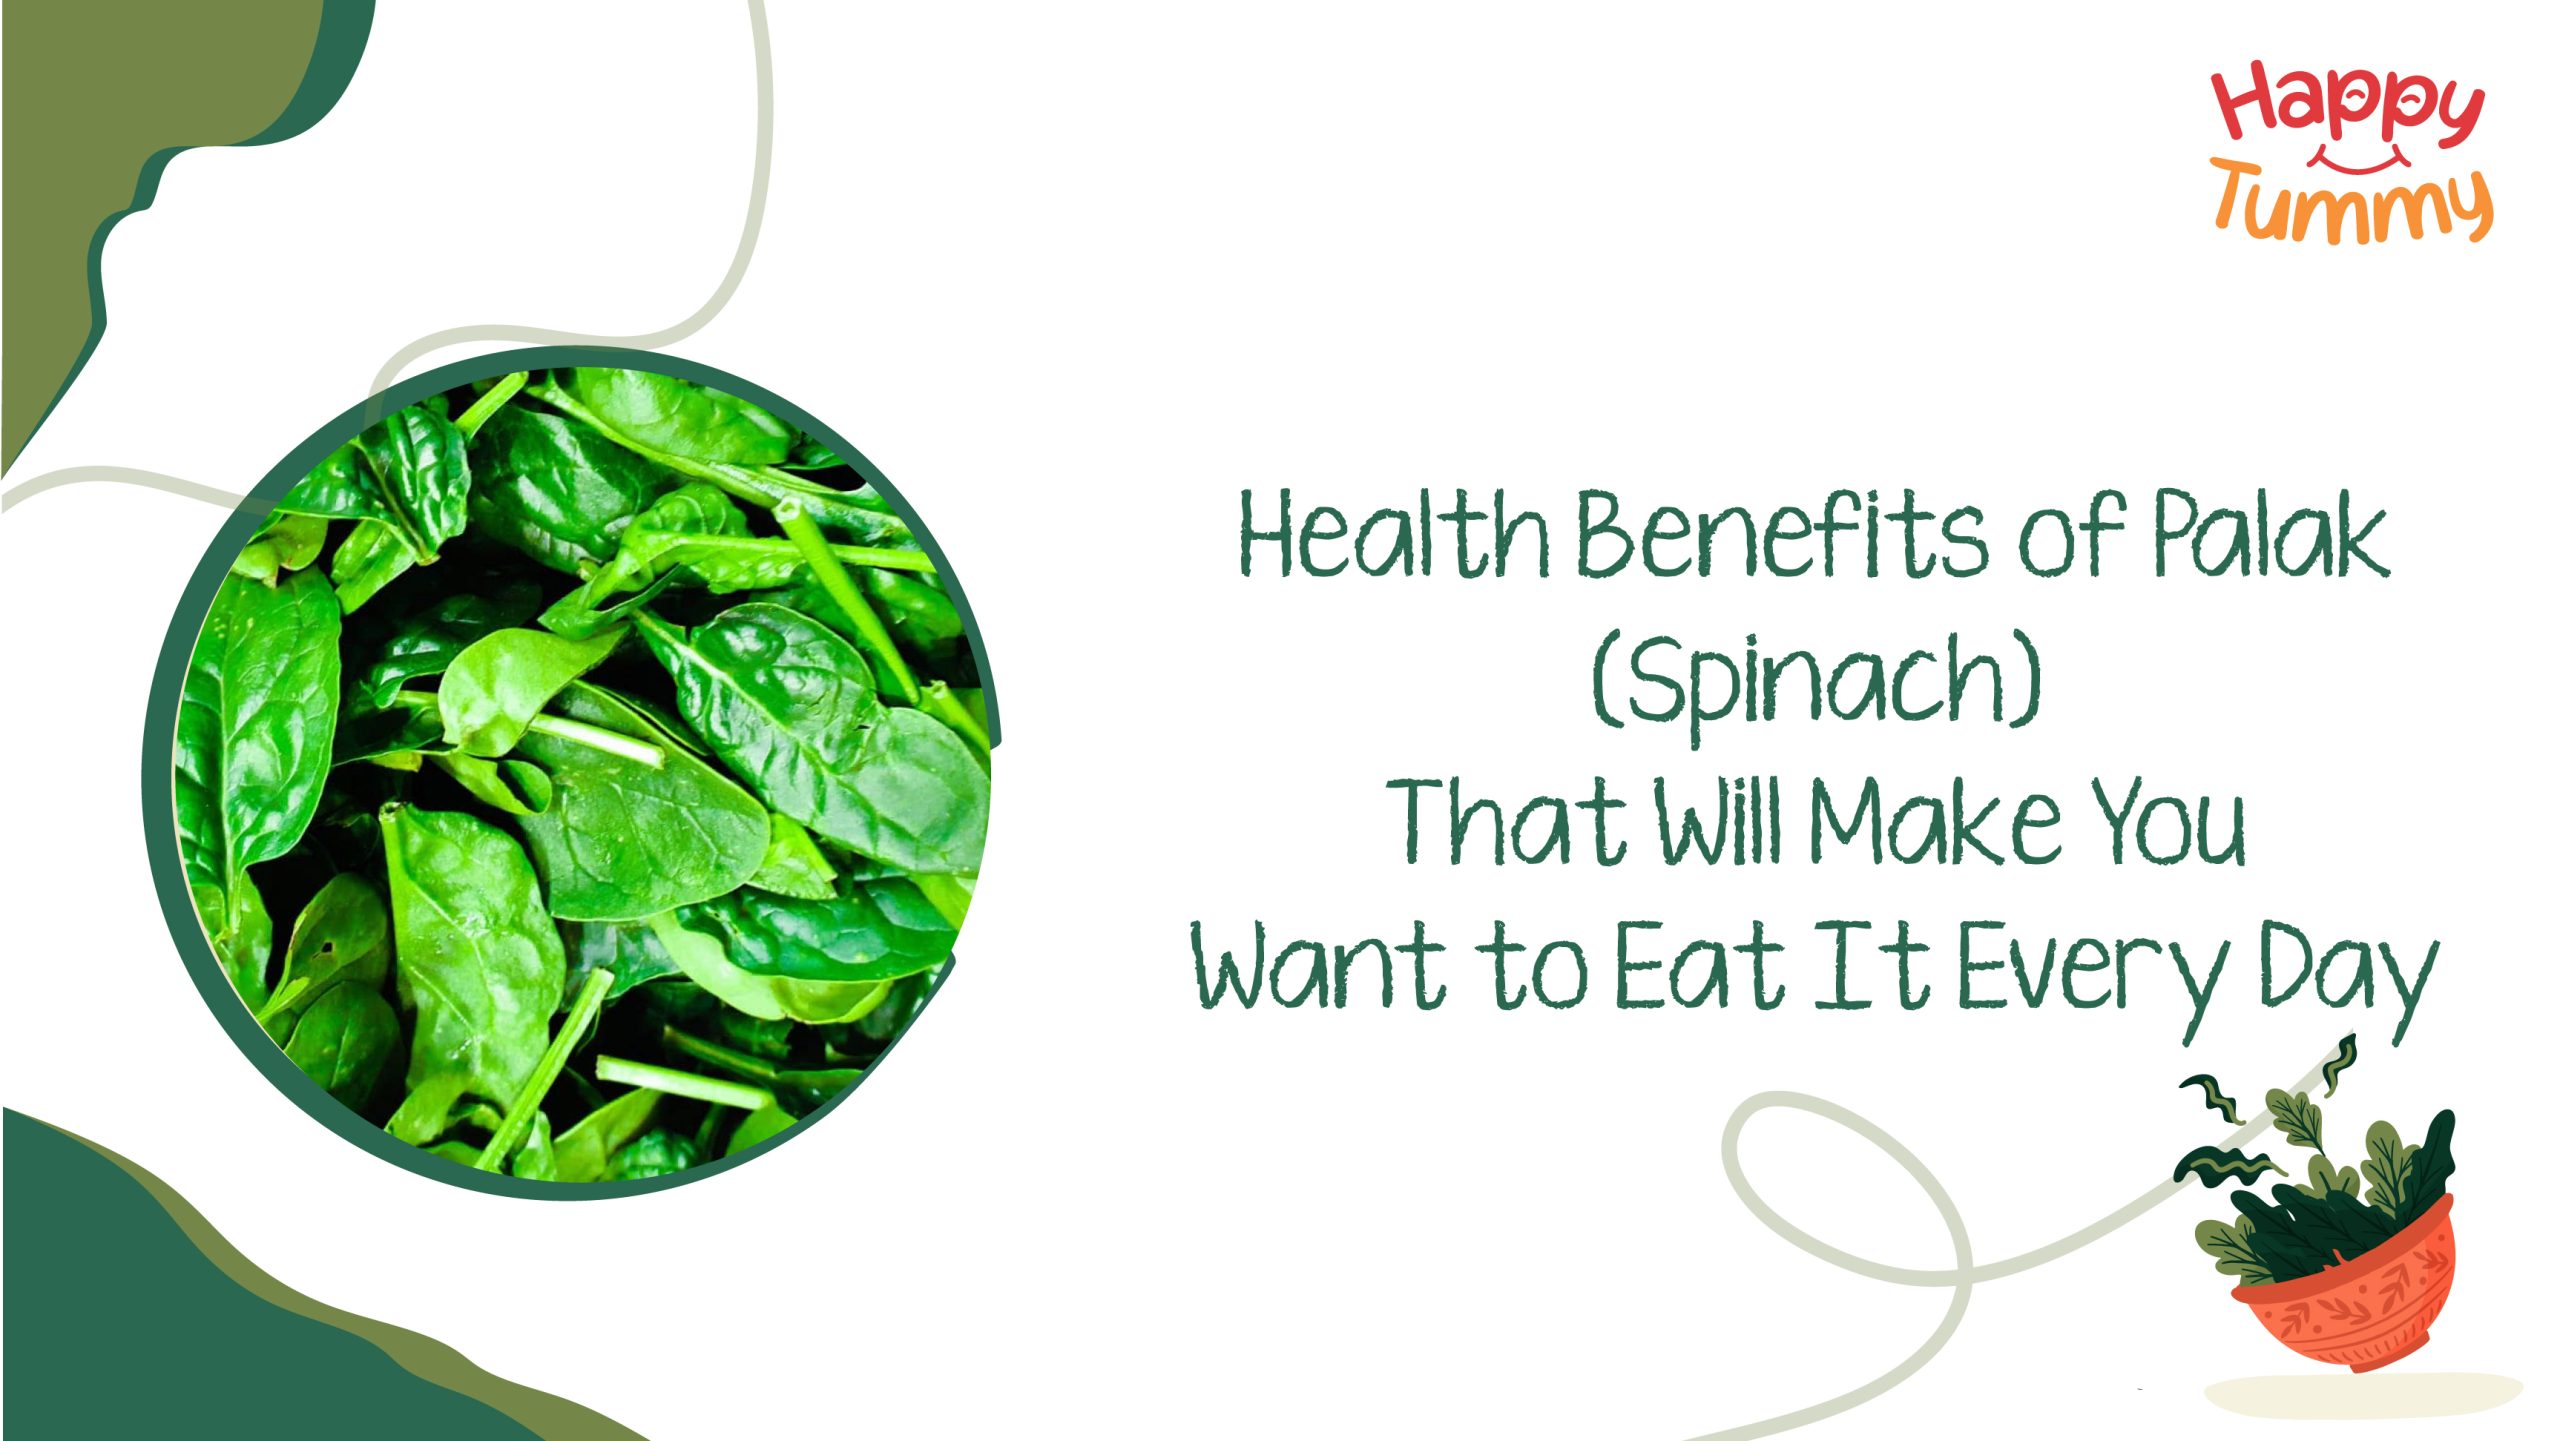 Health Benefits of Palak (Spinach) That Will Make You Want to Eat It Every Day